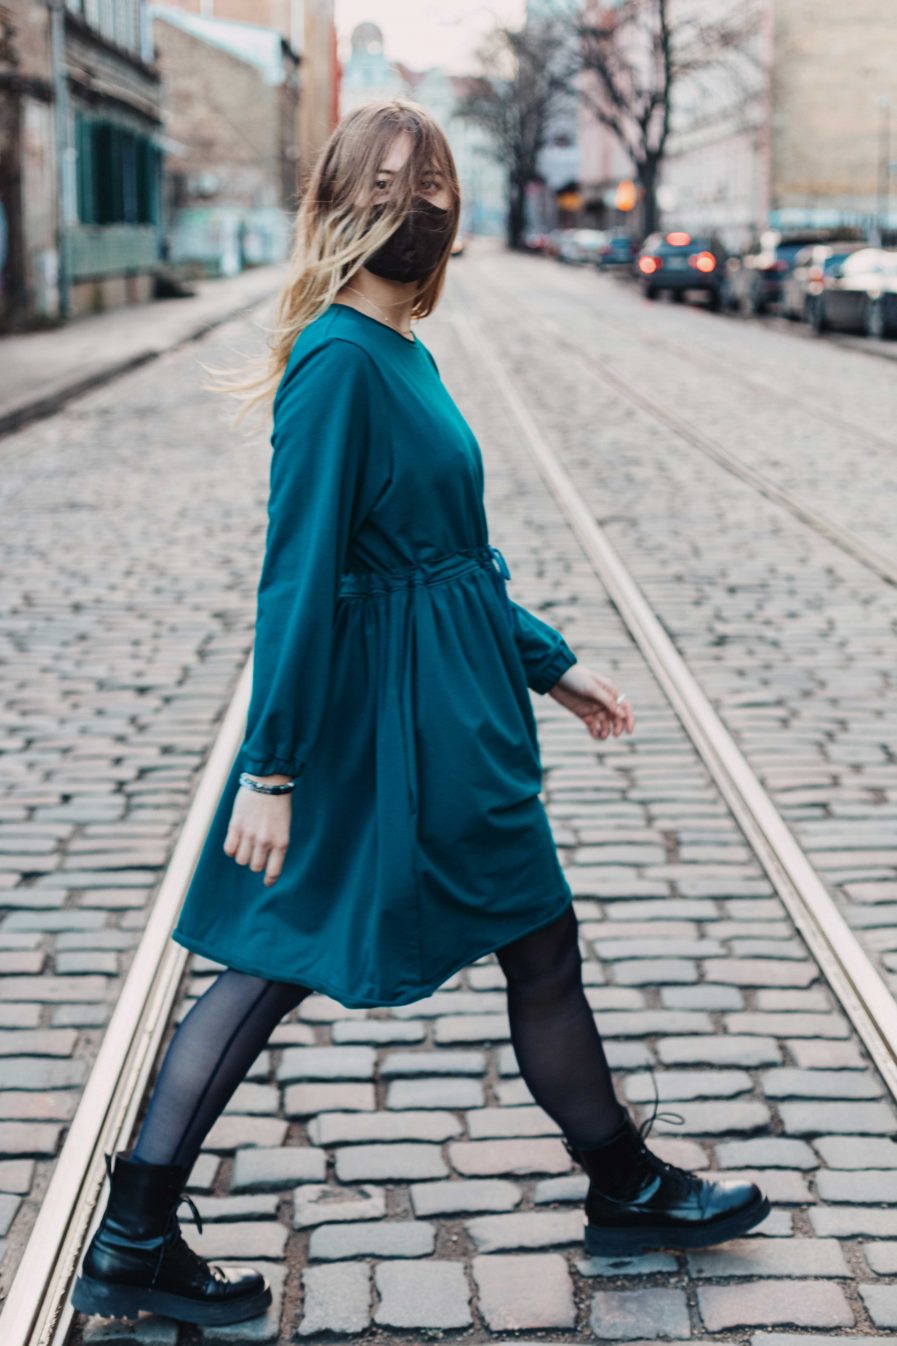 M50 Dress Cute with Pockets Teal